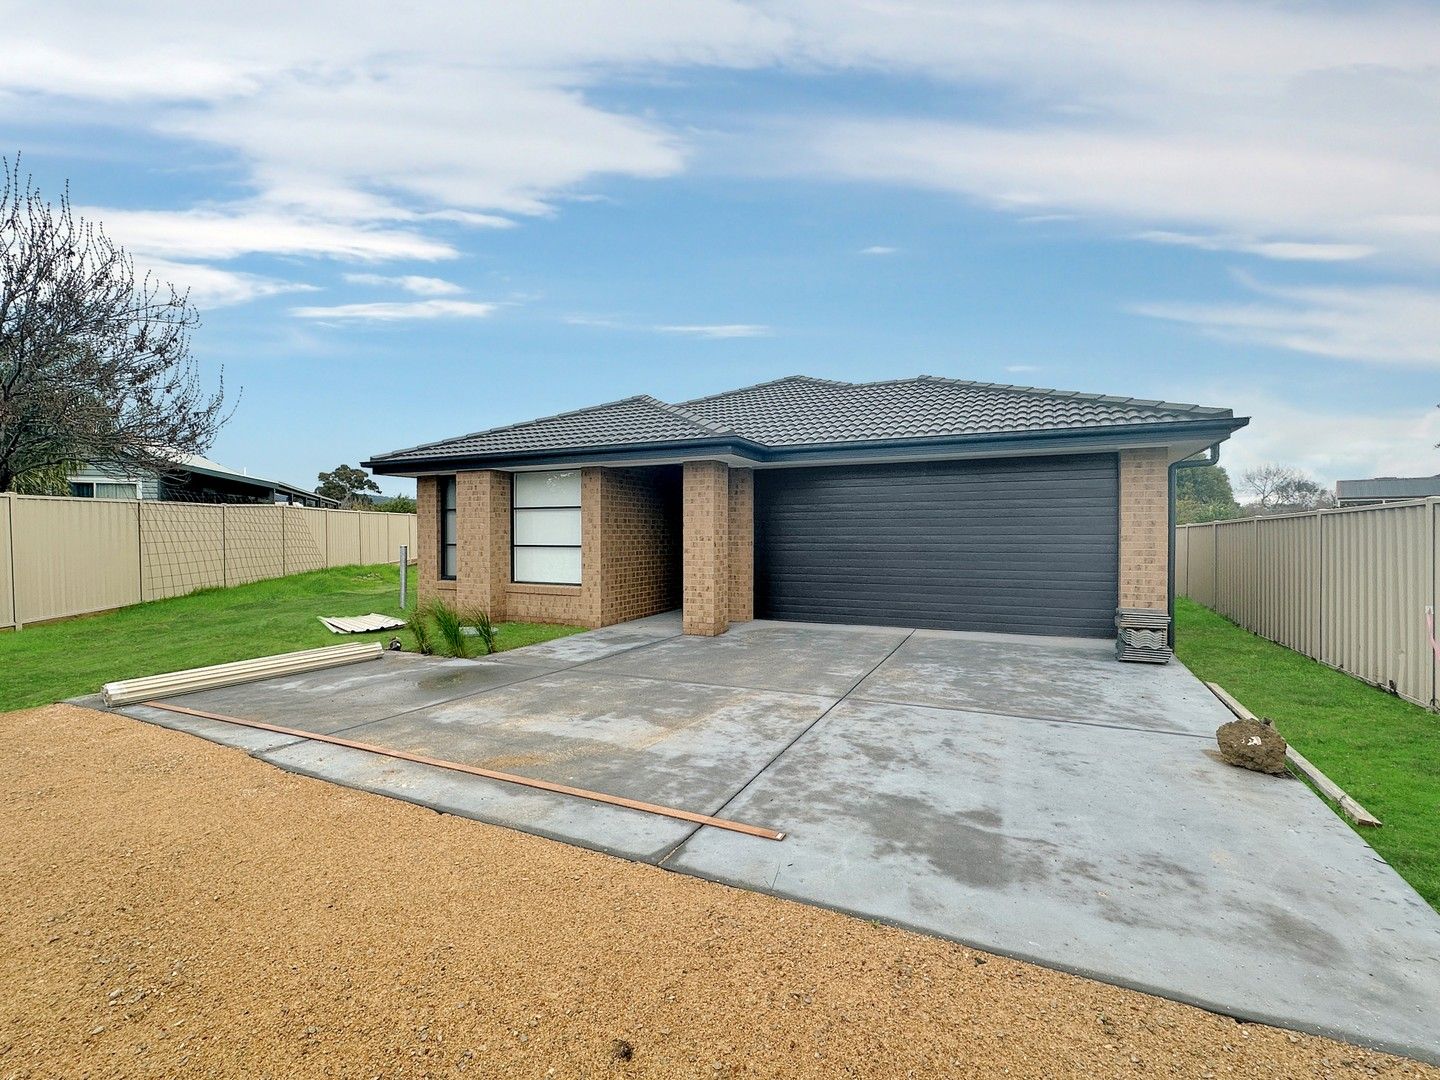 4 bedrooms House in 10 Bell Street EUROA VIC, 3666